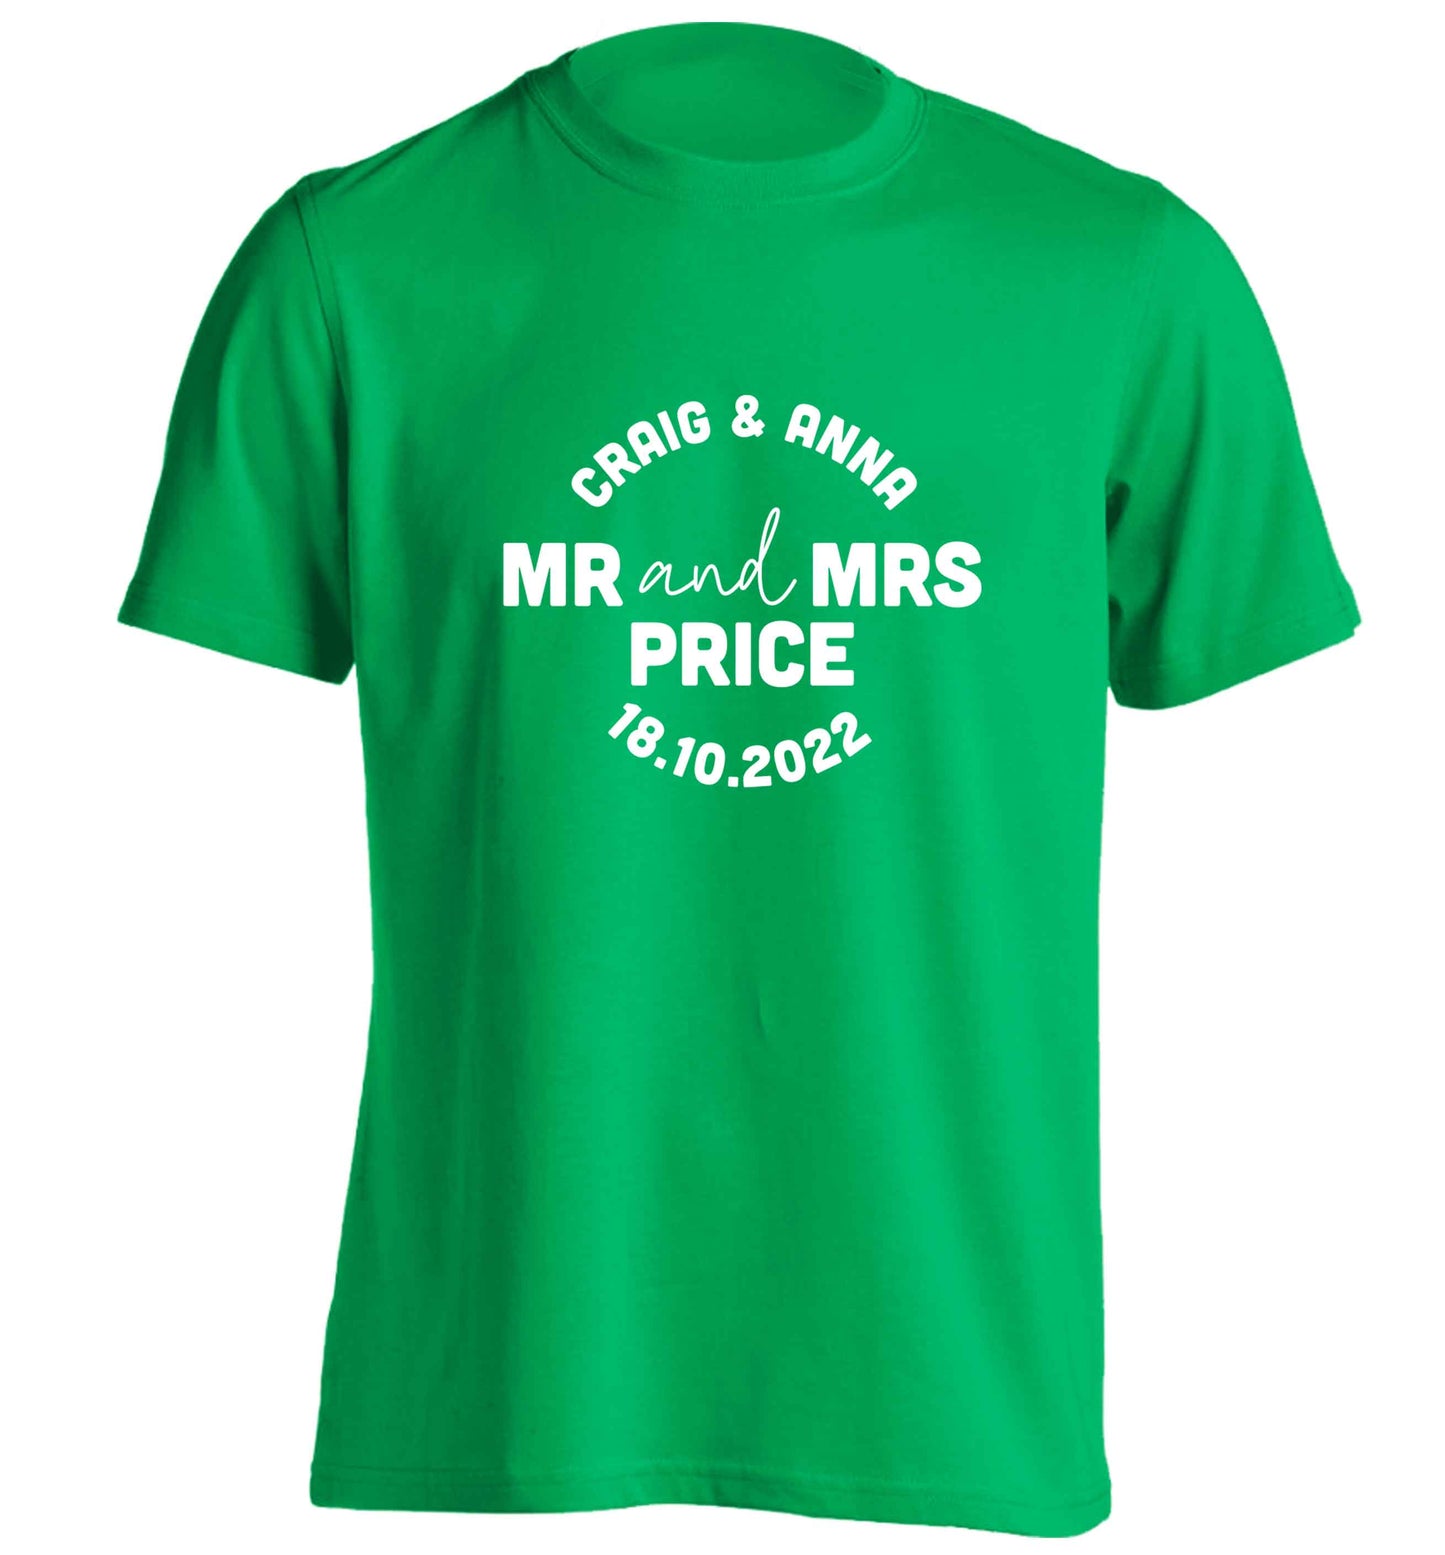 Personalised Mr and Mrs wedding and date! Ideal wedding favours! adults unisex green Tshirt 2XL